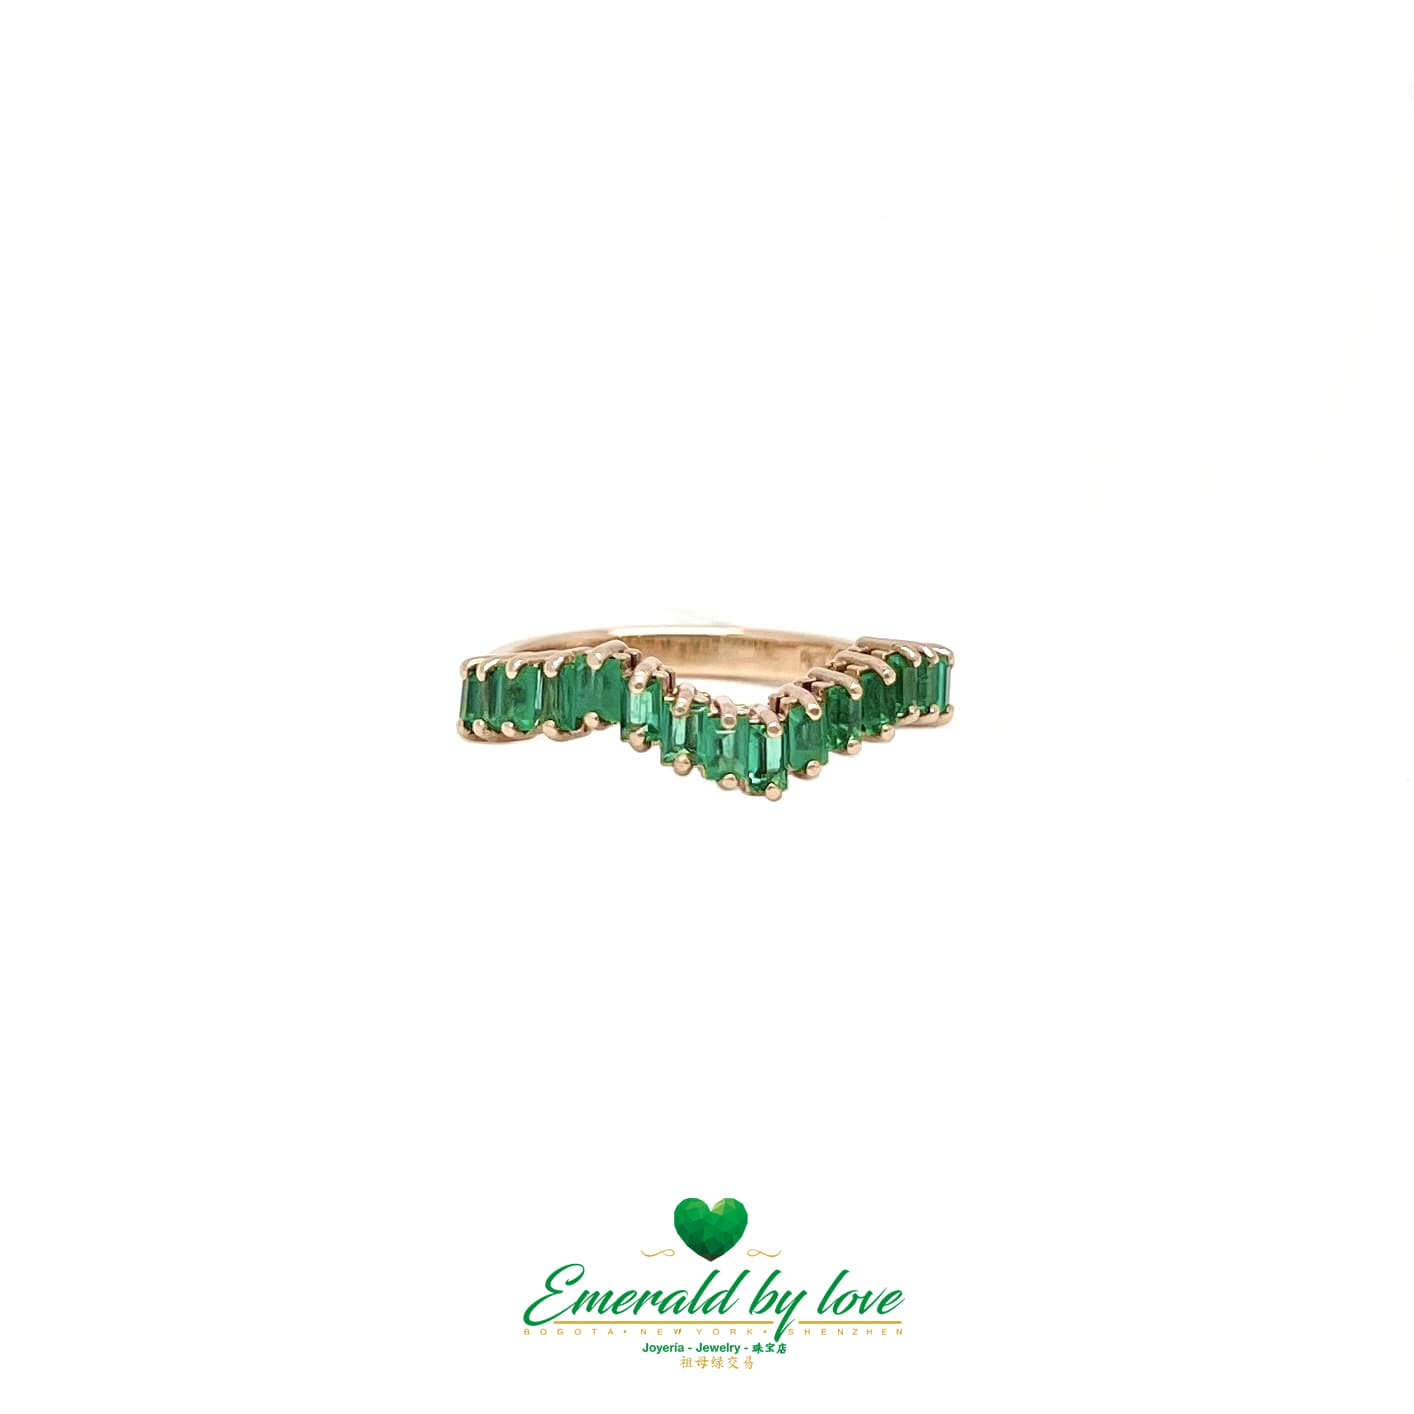 Yellow, Rose and White Gold Ring with Baguette Emeralds Encircling the Band